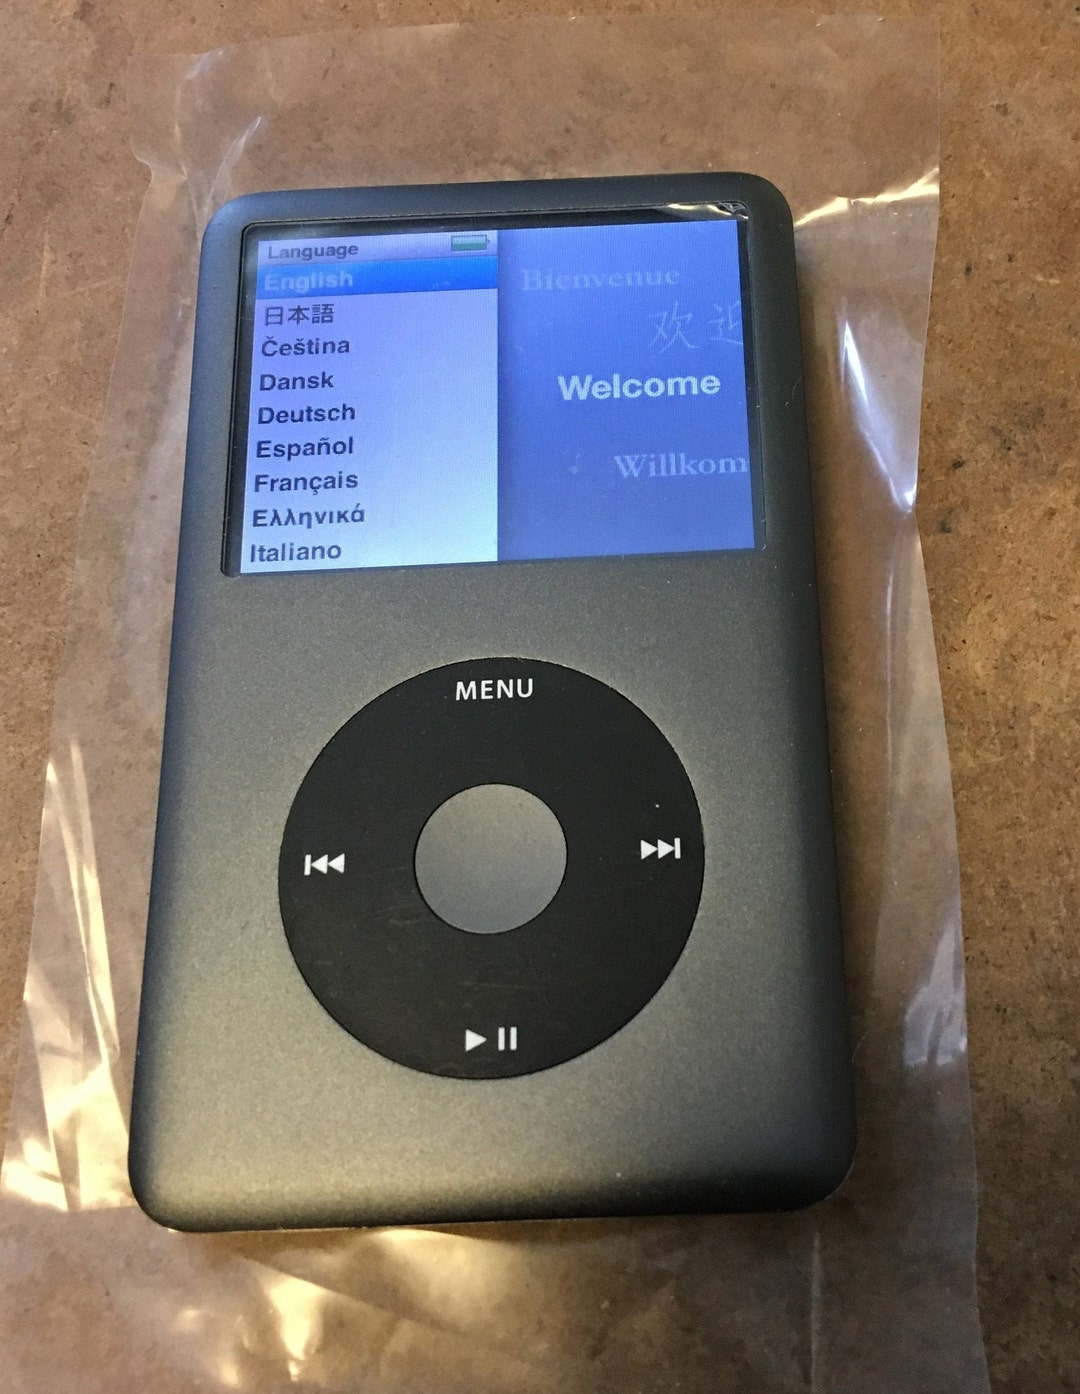 Modding an iPod Classic - 1 TB and bigger battery